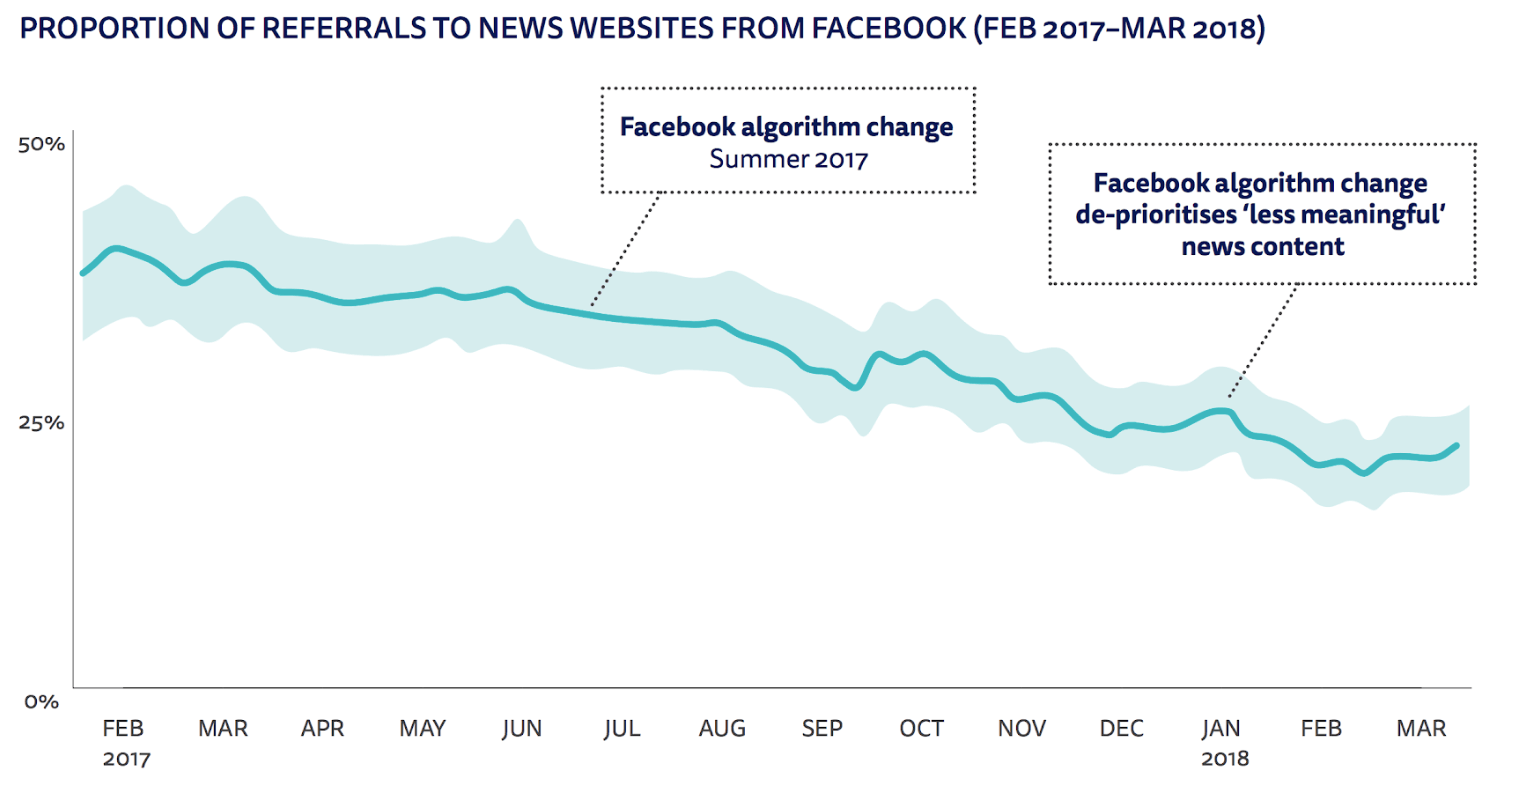 Proportion of referrals to news sites from Facebook